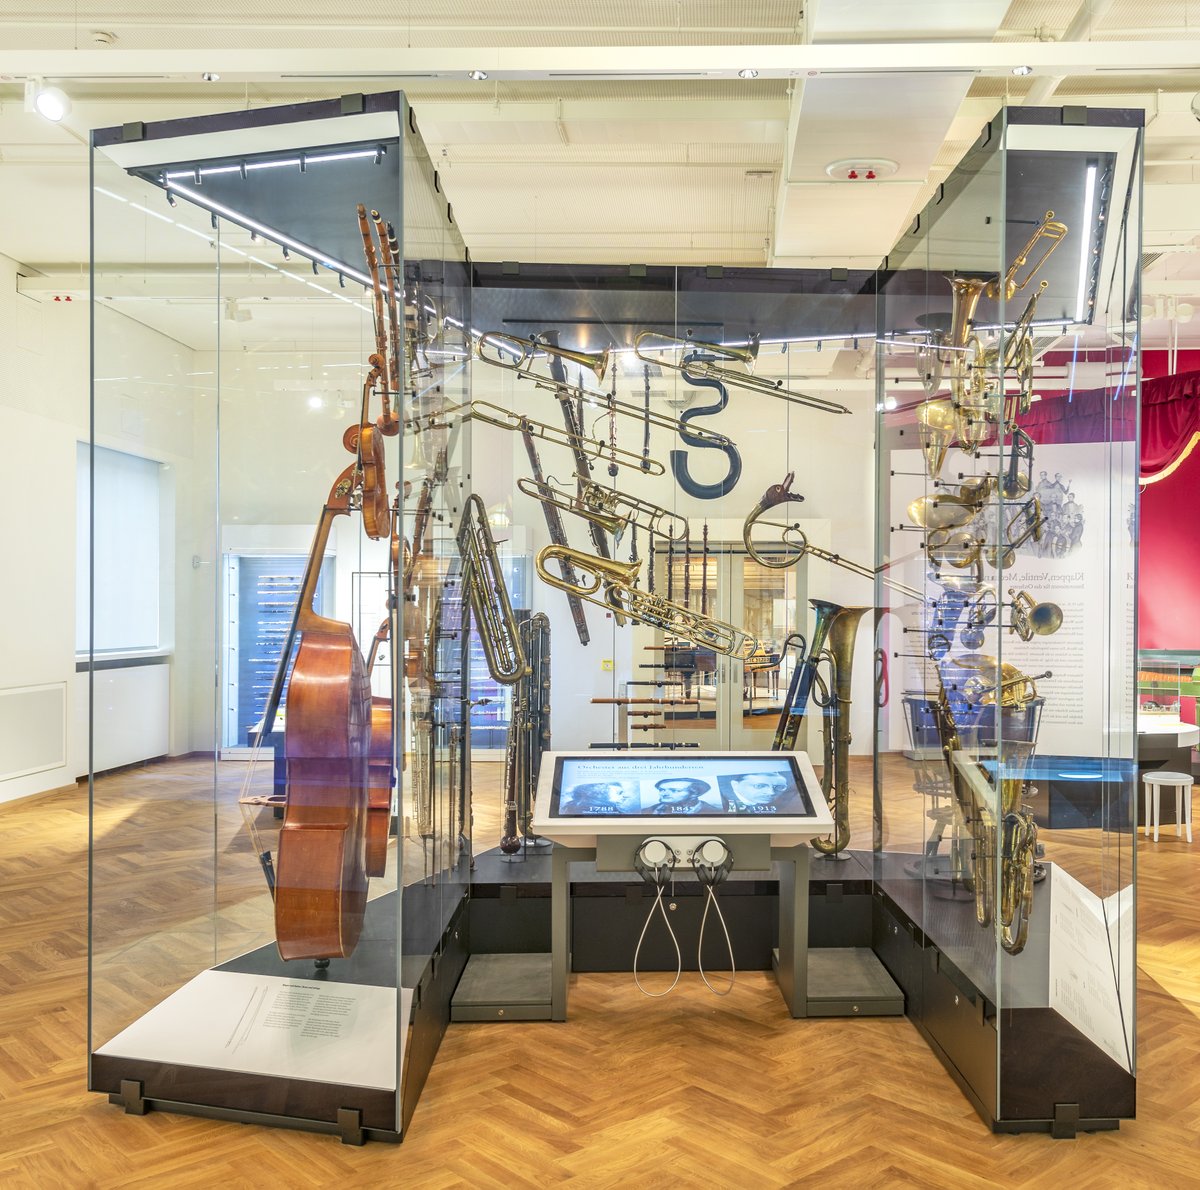 The orchestra cube, a display case with a side length of 3.60 meters is one of the highlights in the Musical Instruments exhibition. About 70 instruments attached to glass walls seem to hover inside. We highly recommend to try out the related media station.